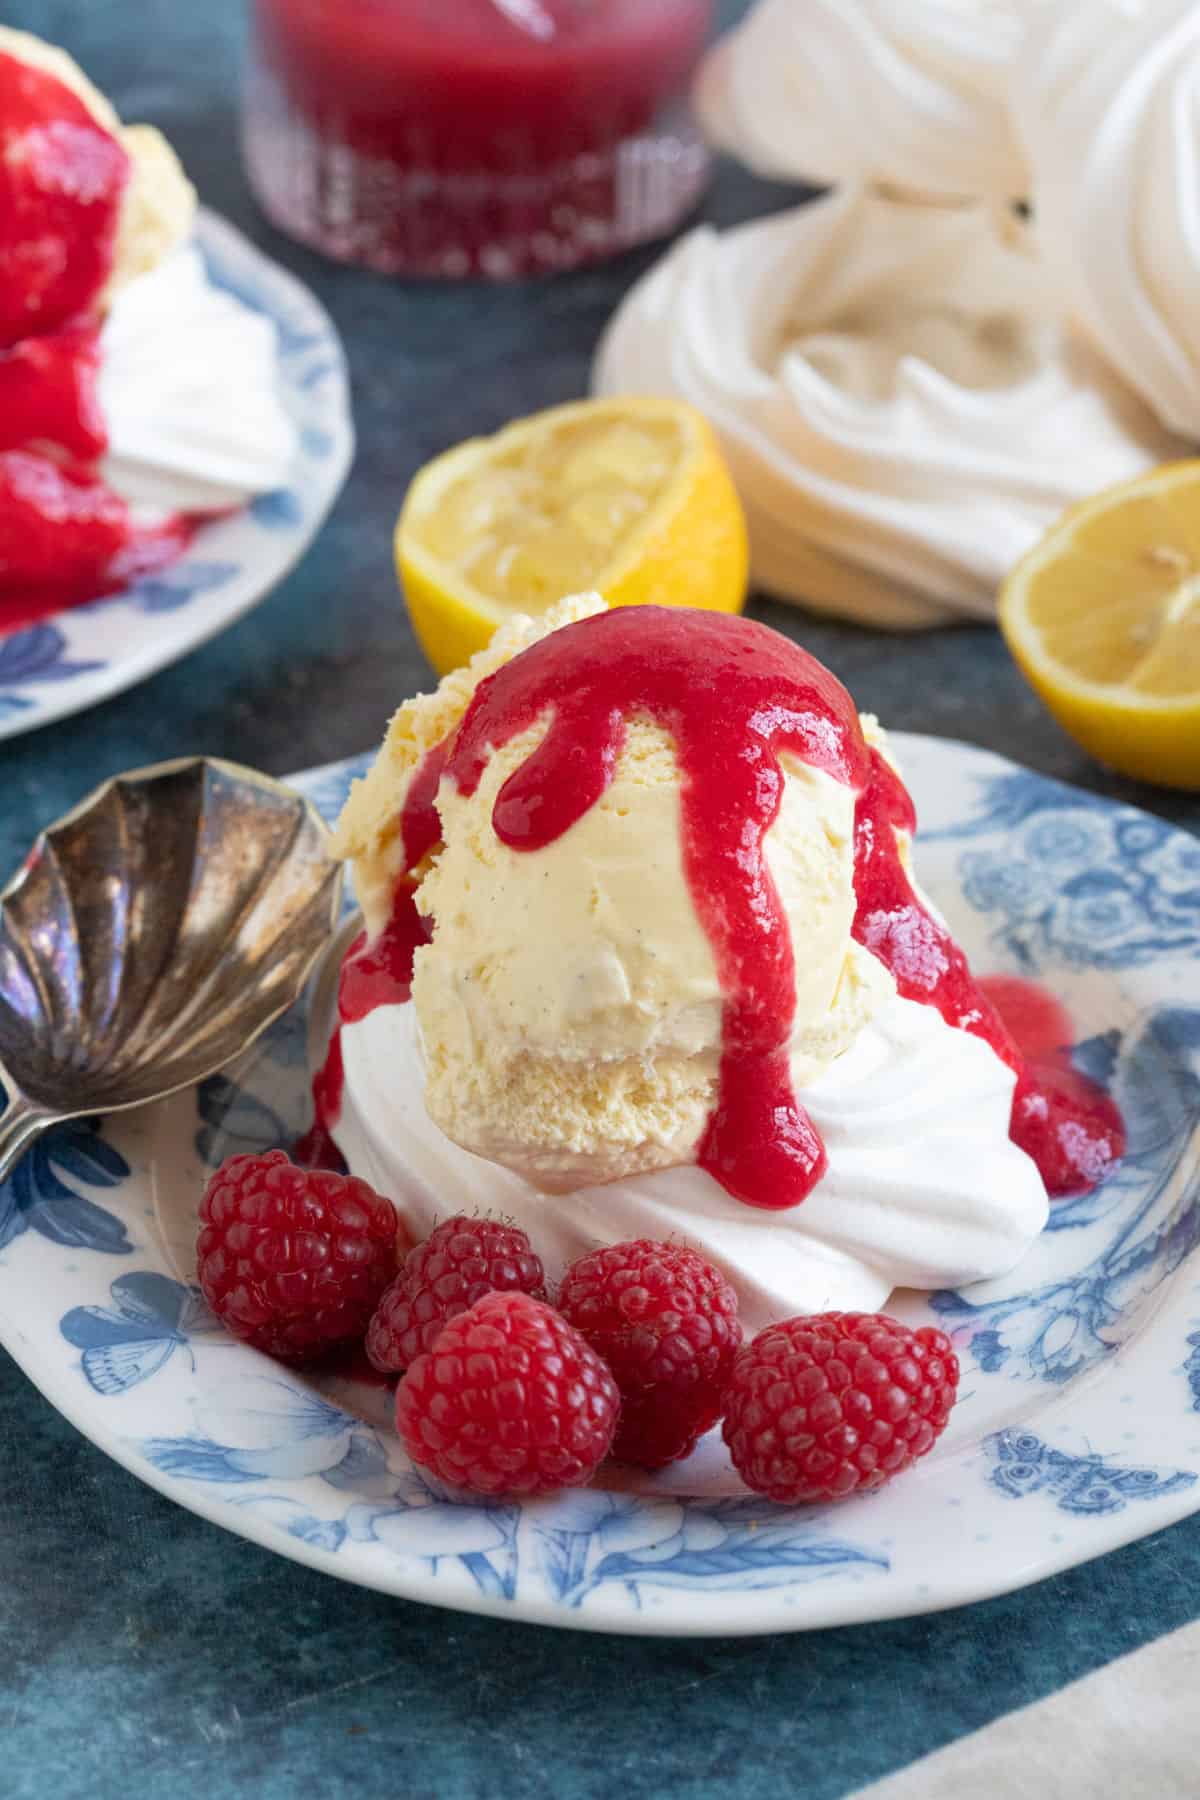 Fresh raspberry coulis drizzled over ice cream.